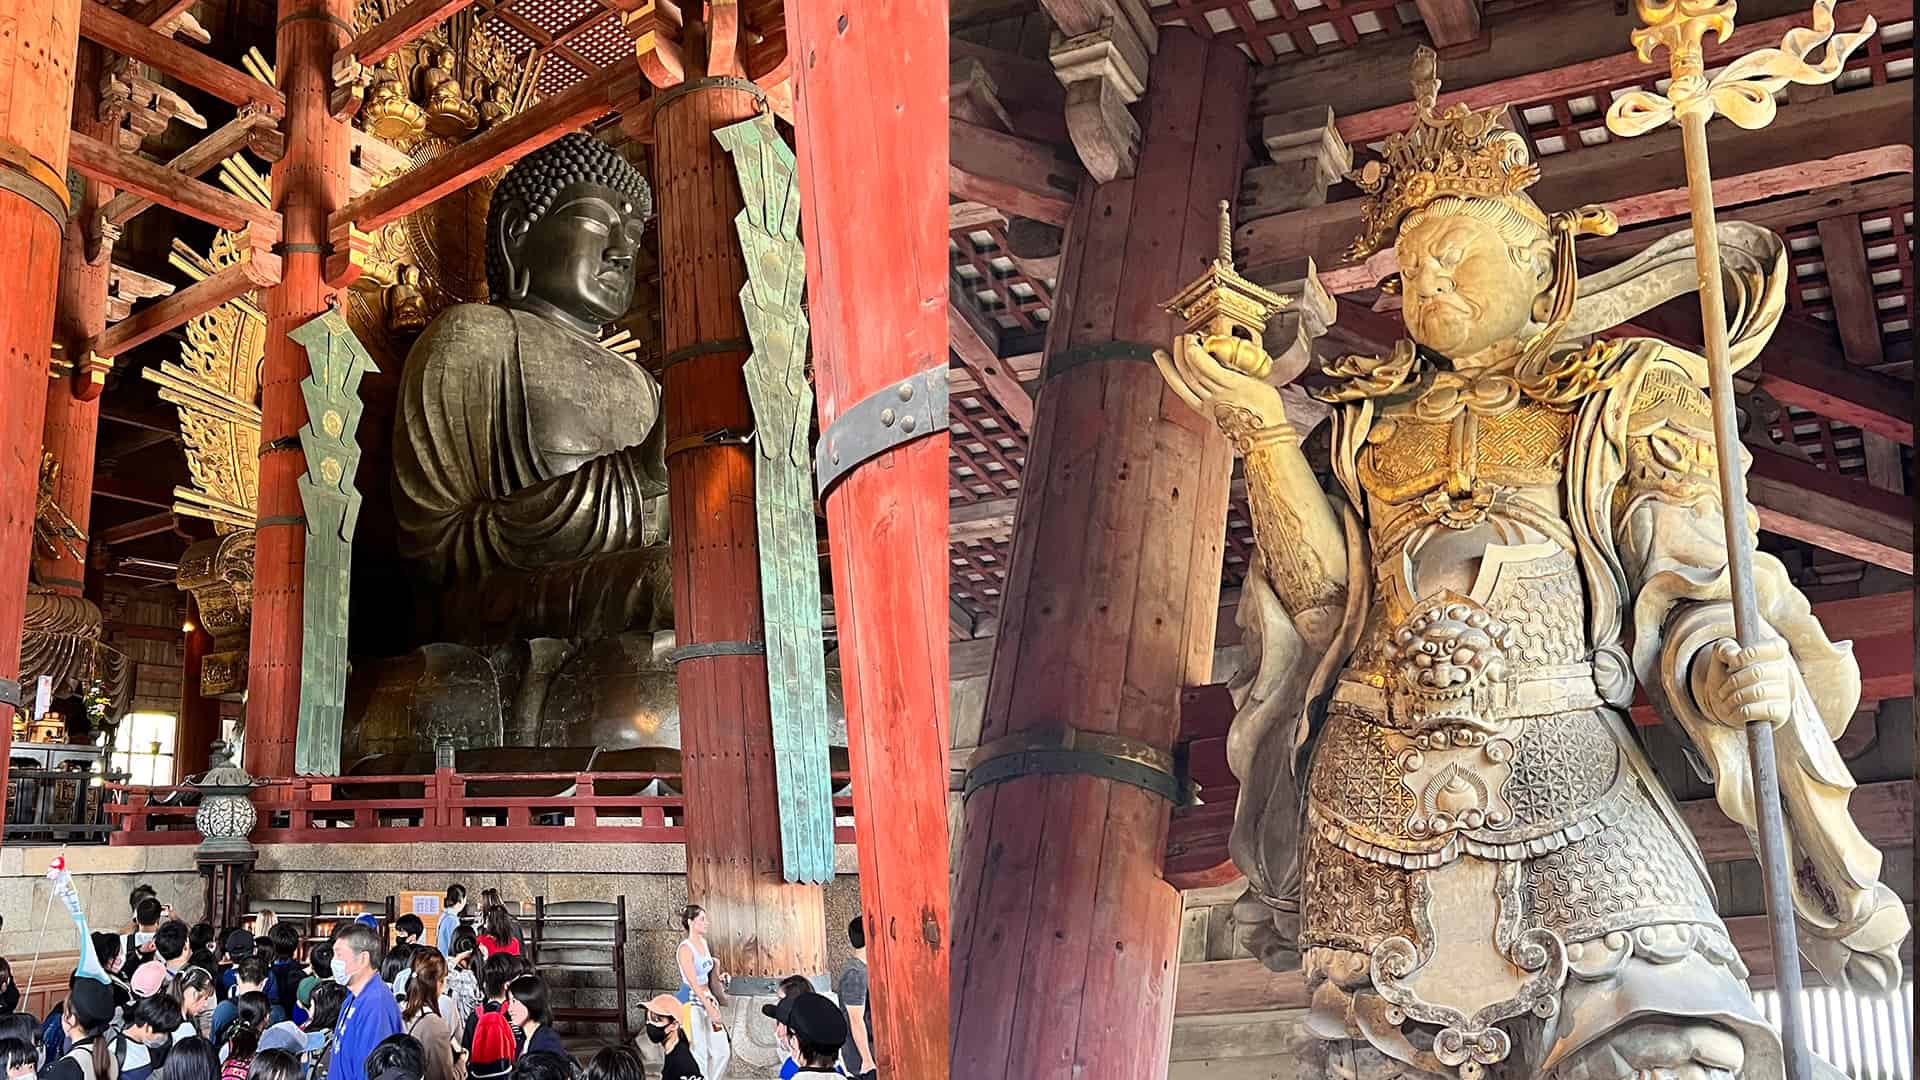 Giant Buddha and statues inside Todaji Temple with tourists surrounding